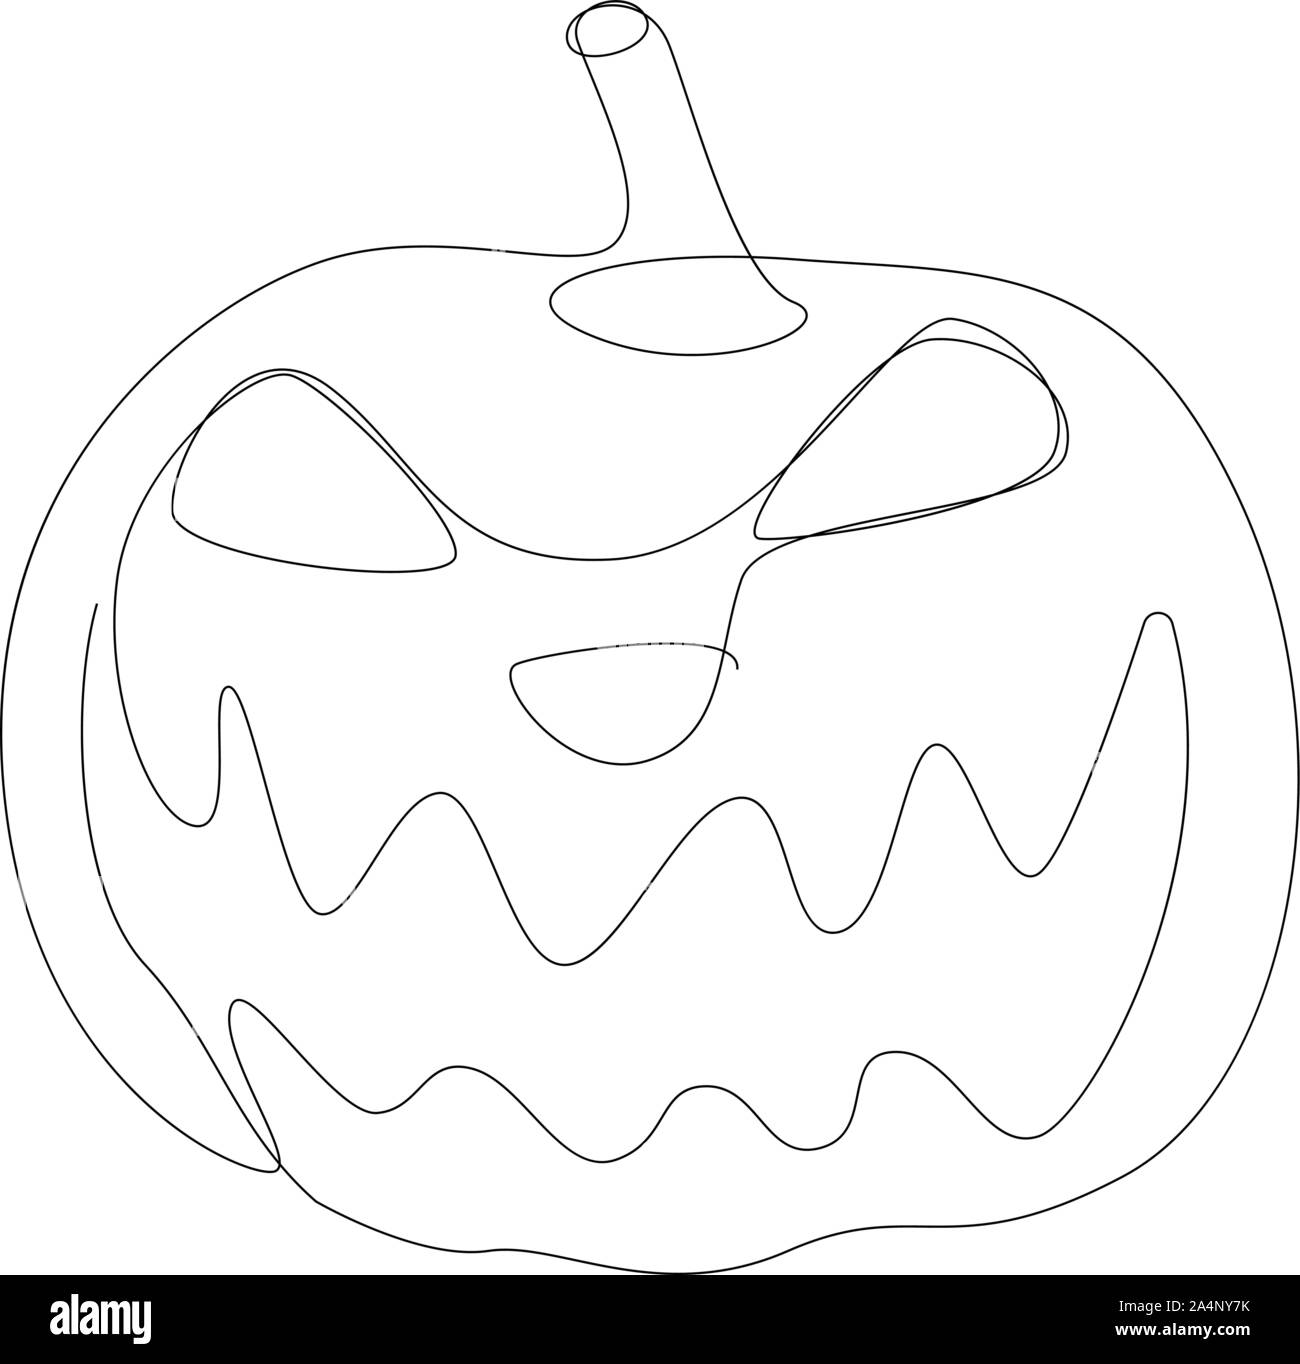 Halloween pumpkin with face illustration drawn by one line. Autumn holidays. Vector illustration Stock Vector